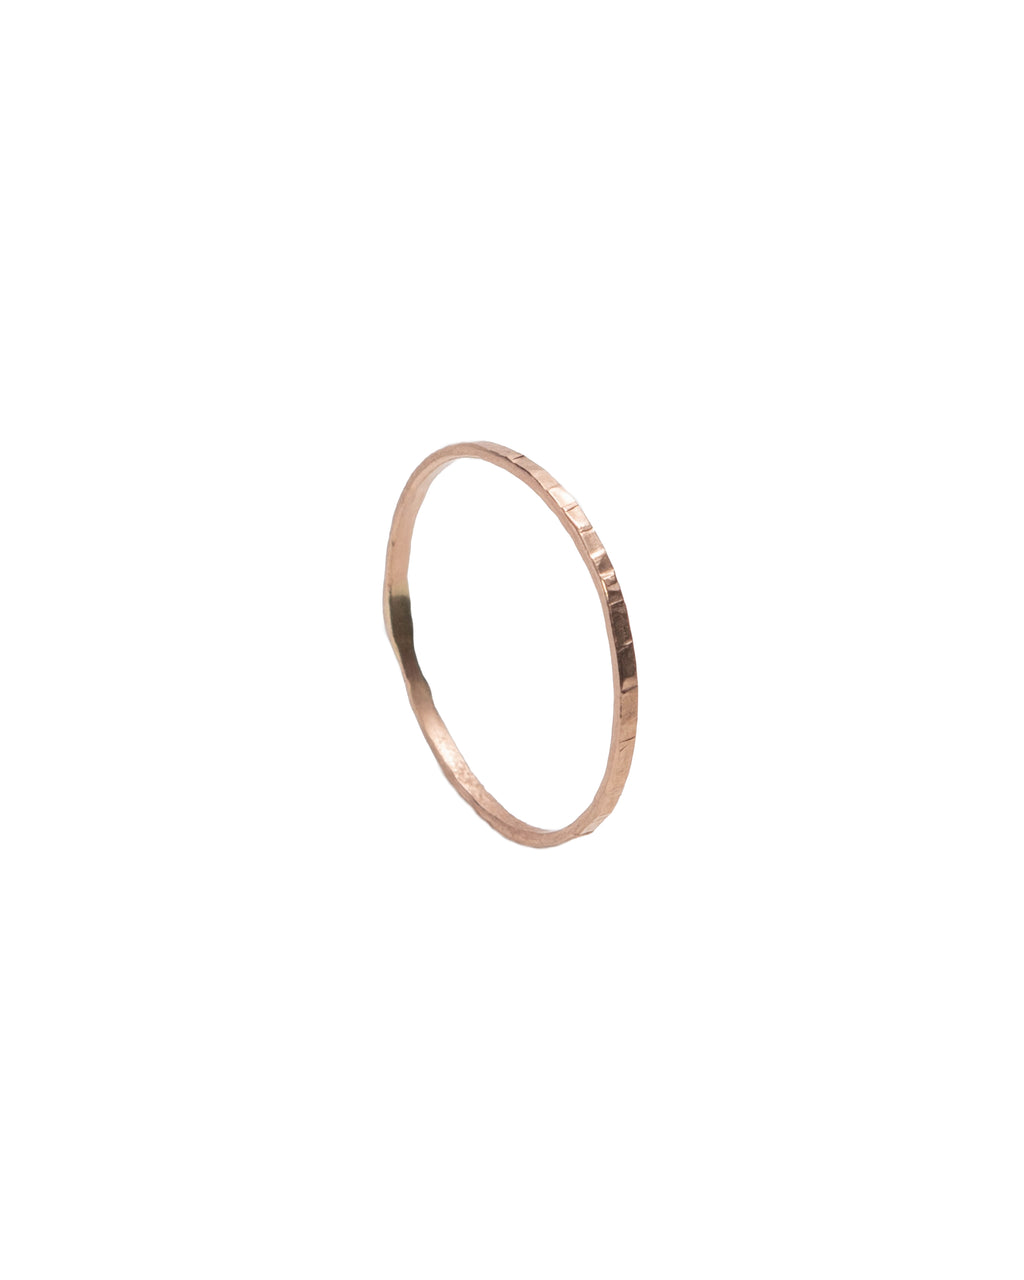 Tiny 14K Rose Gold Hammered Stacking Ring